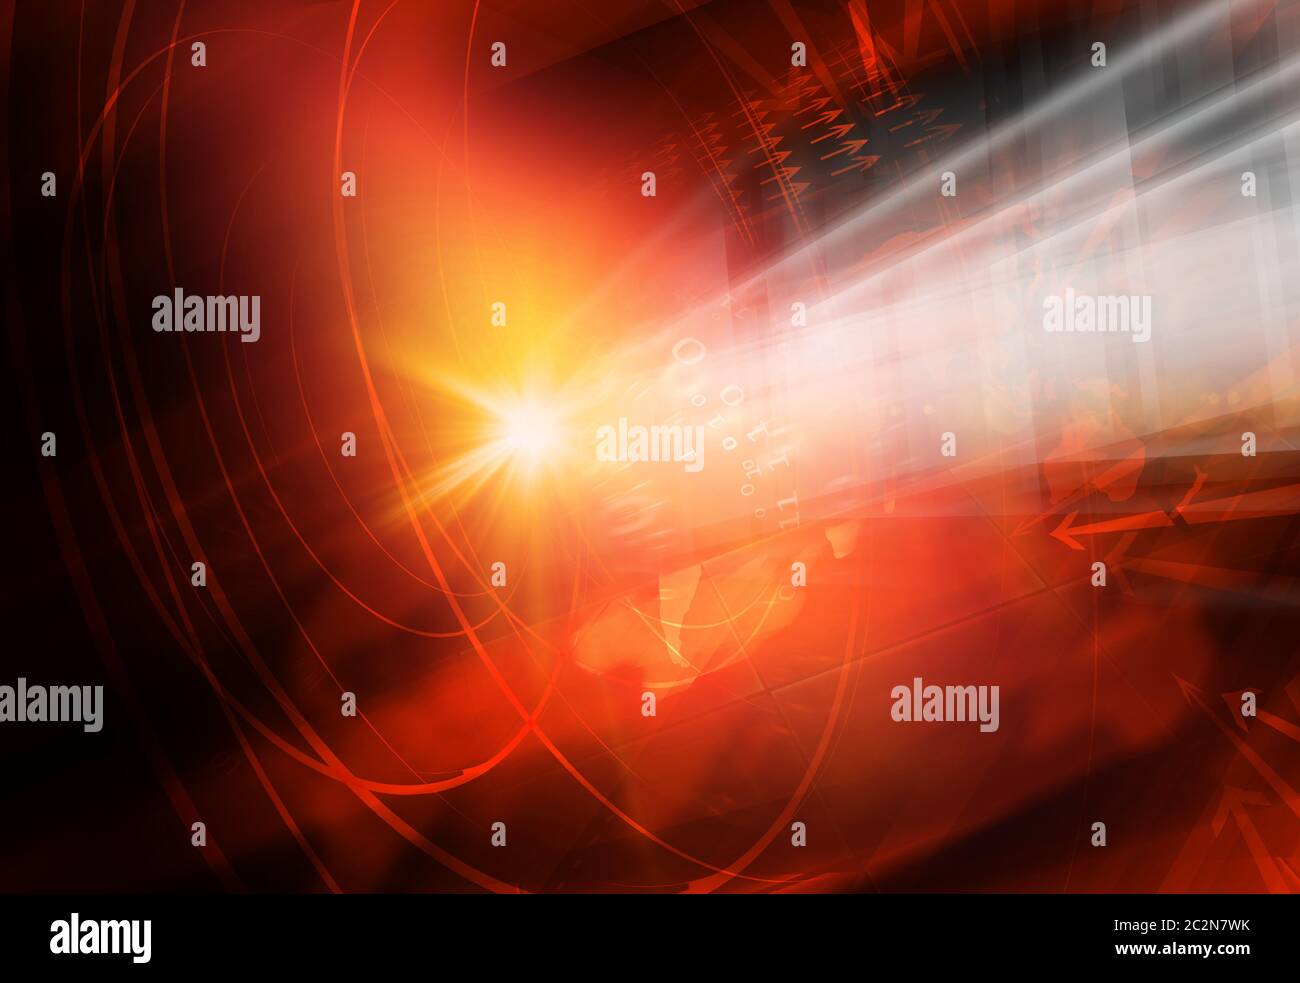 Graphical modern studio news background, suitable for Internet and TV news. multipe round circle around the earth map with lens flare efect. Stock Photo